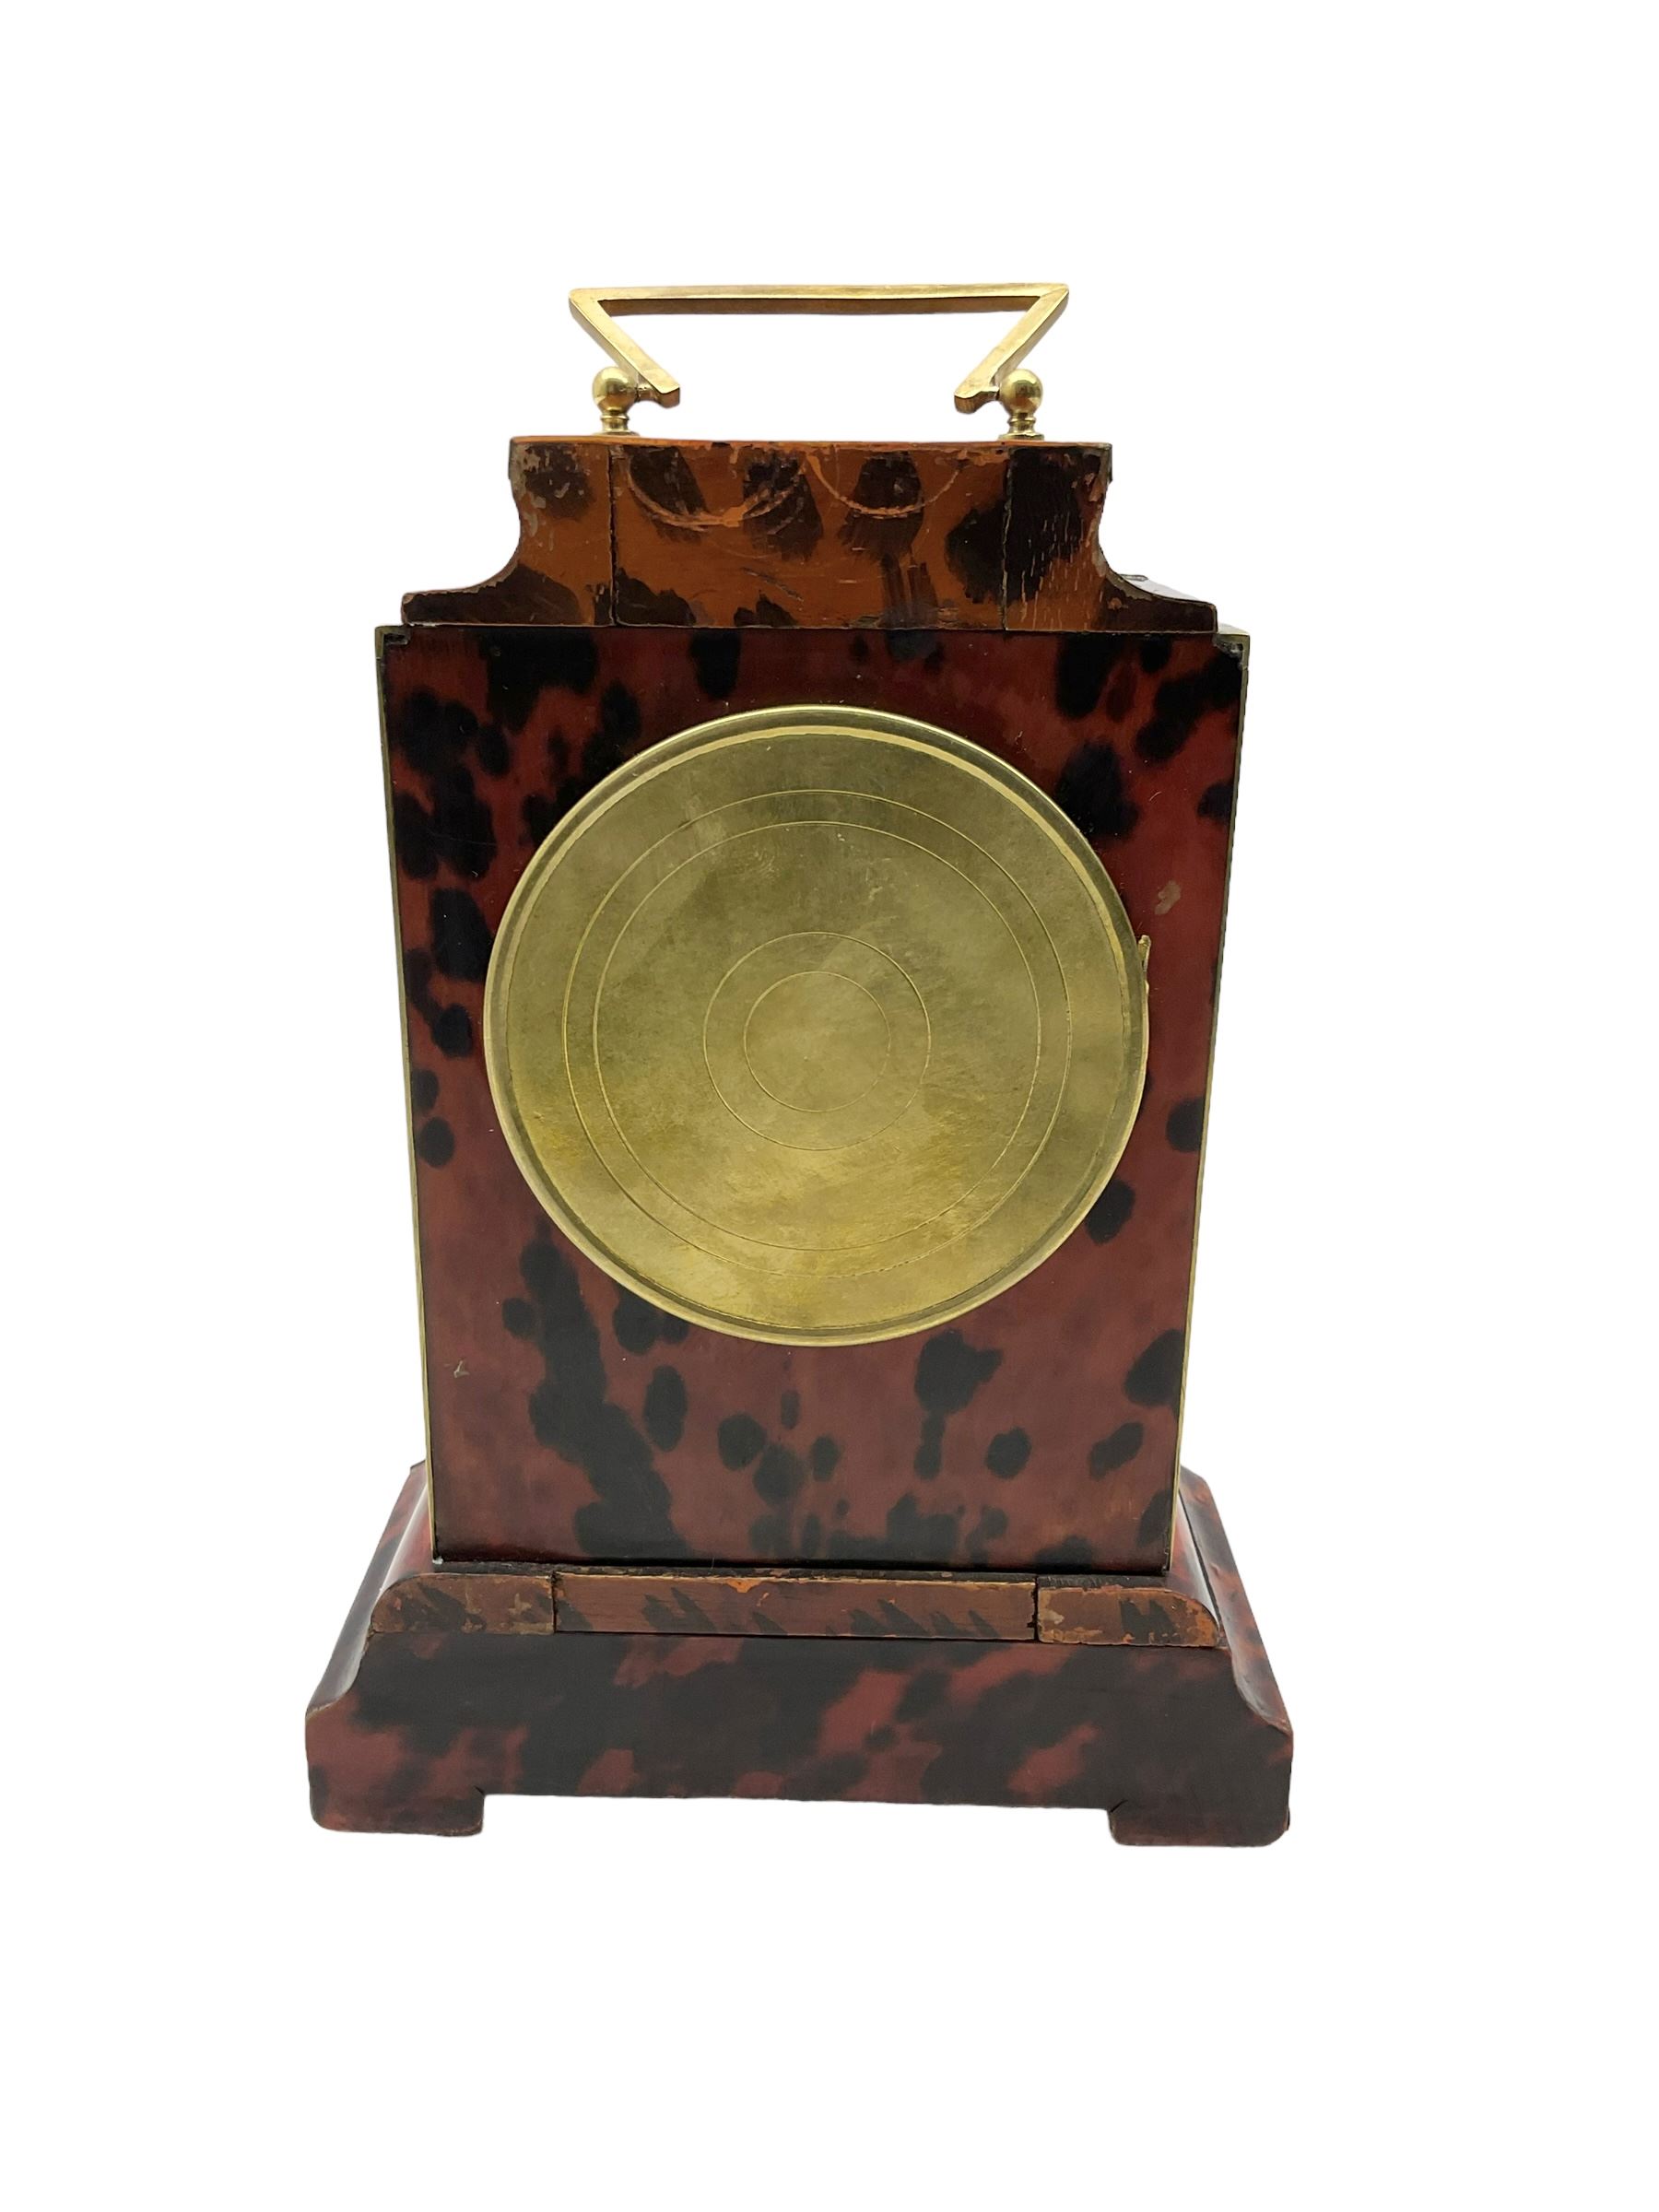 French - Early 20th century faux tortoiseshell mantle clock - Image 3 of 4